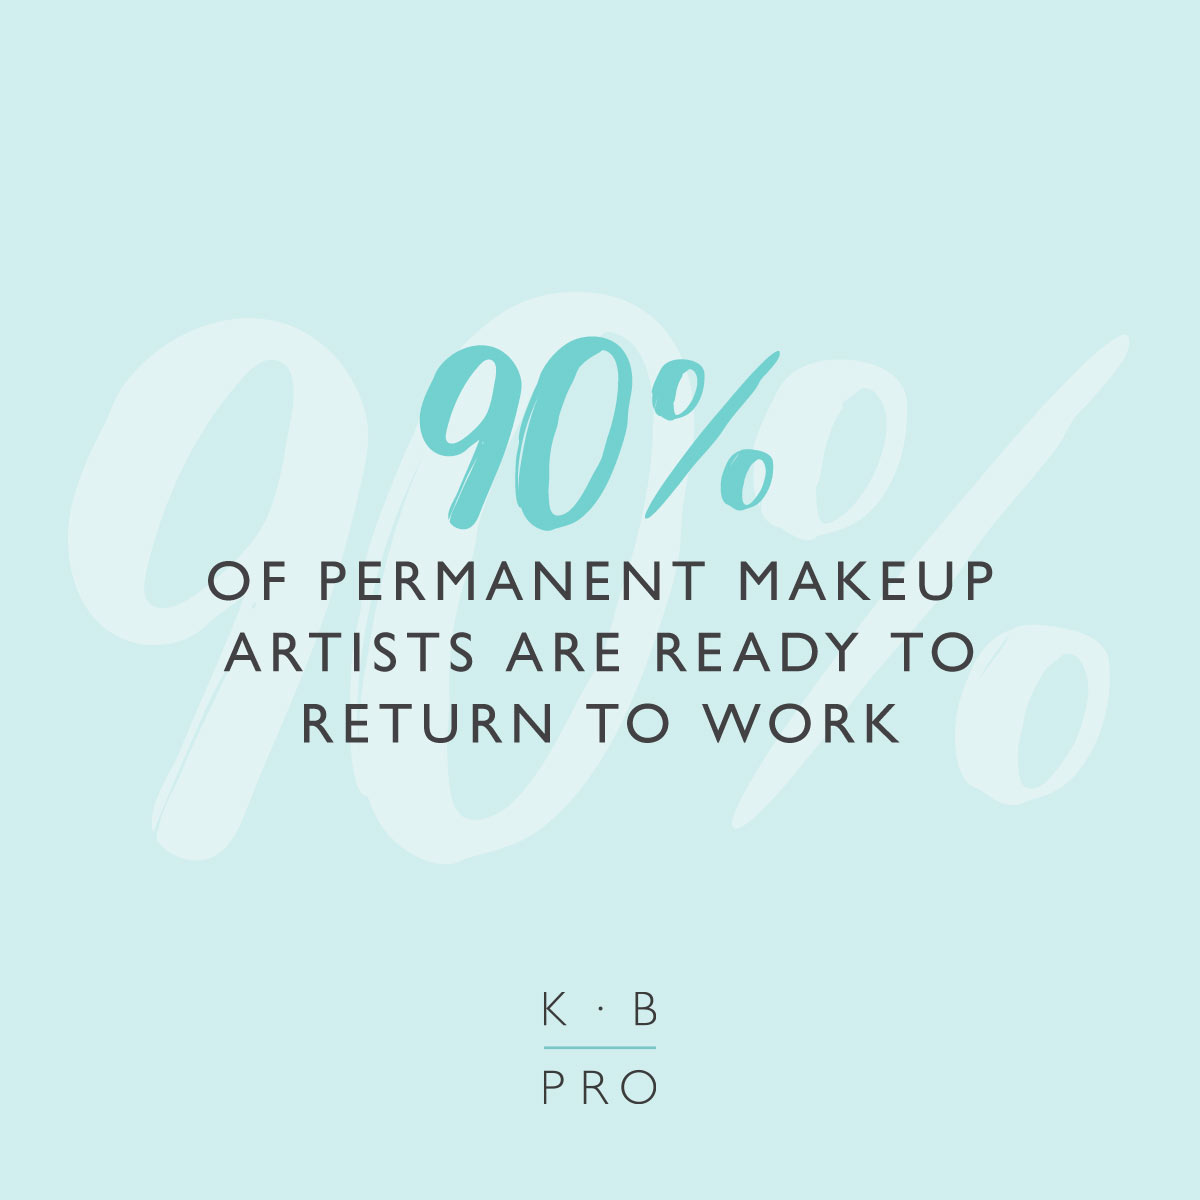 90% of permanent make-up artsis are ready to return to work